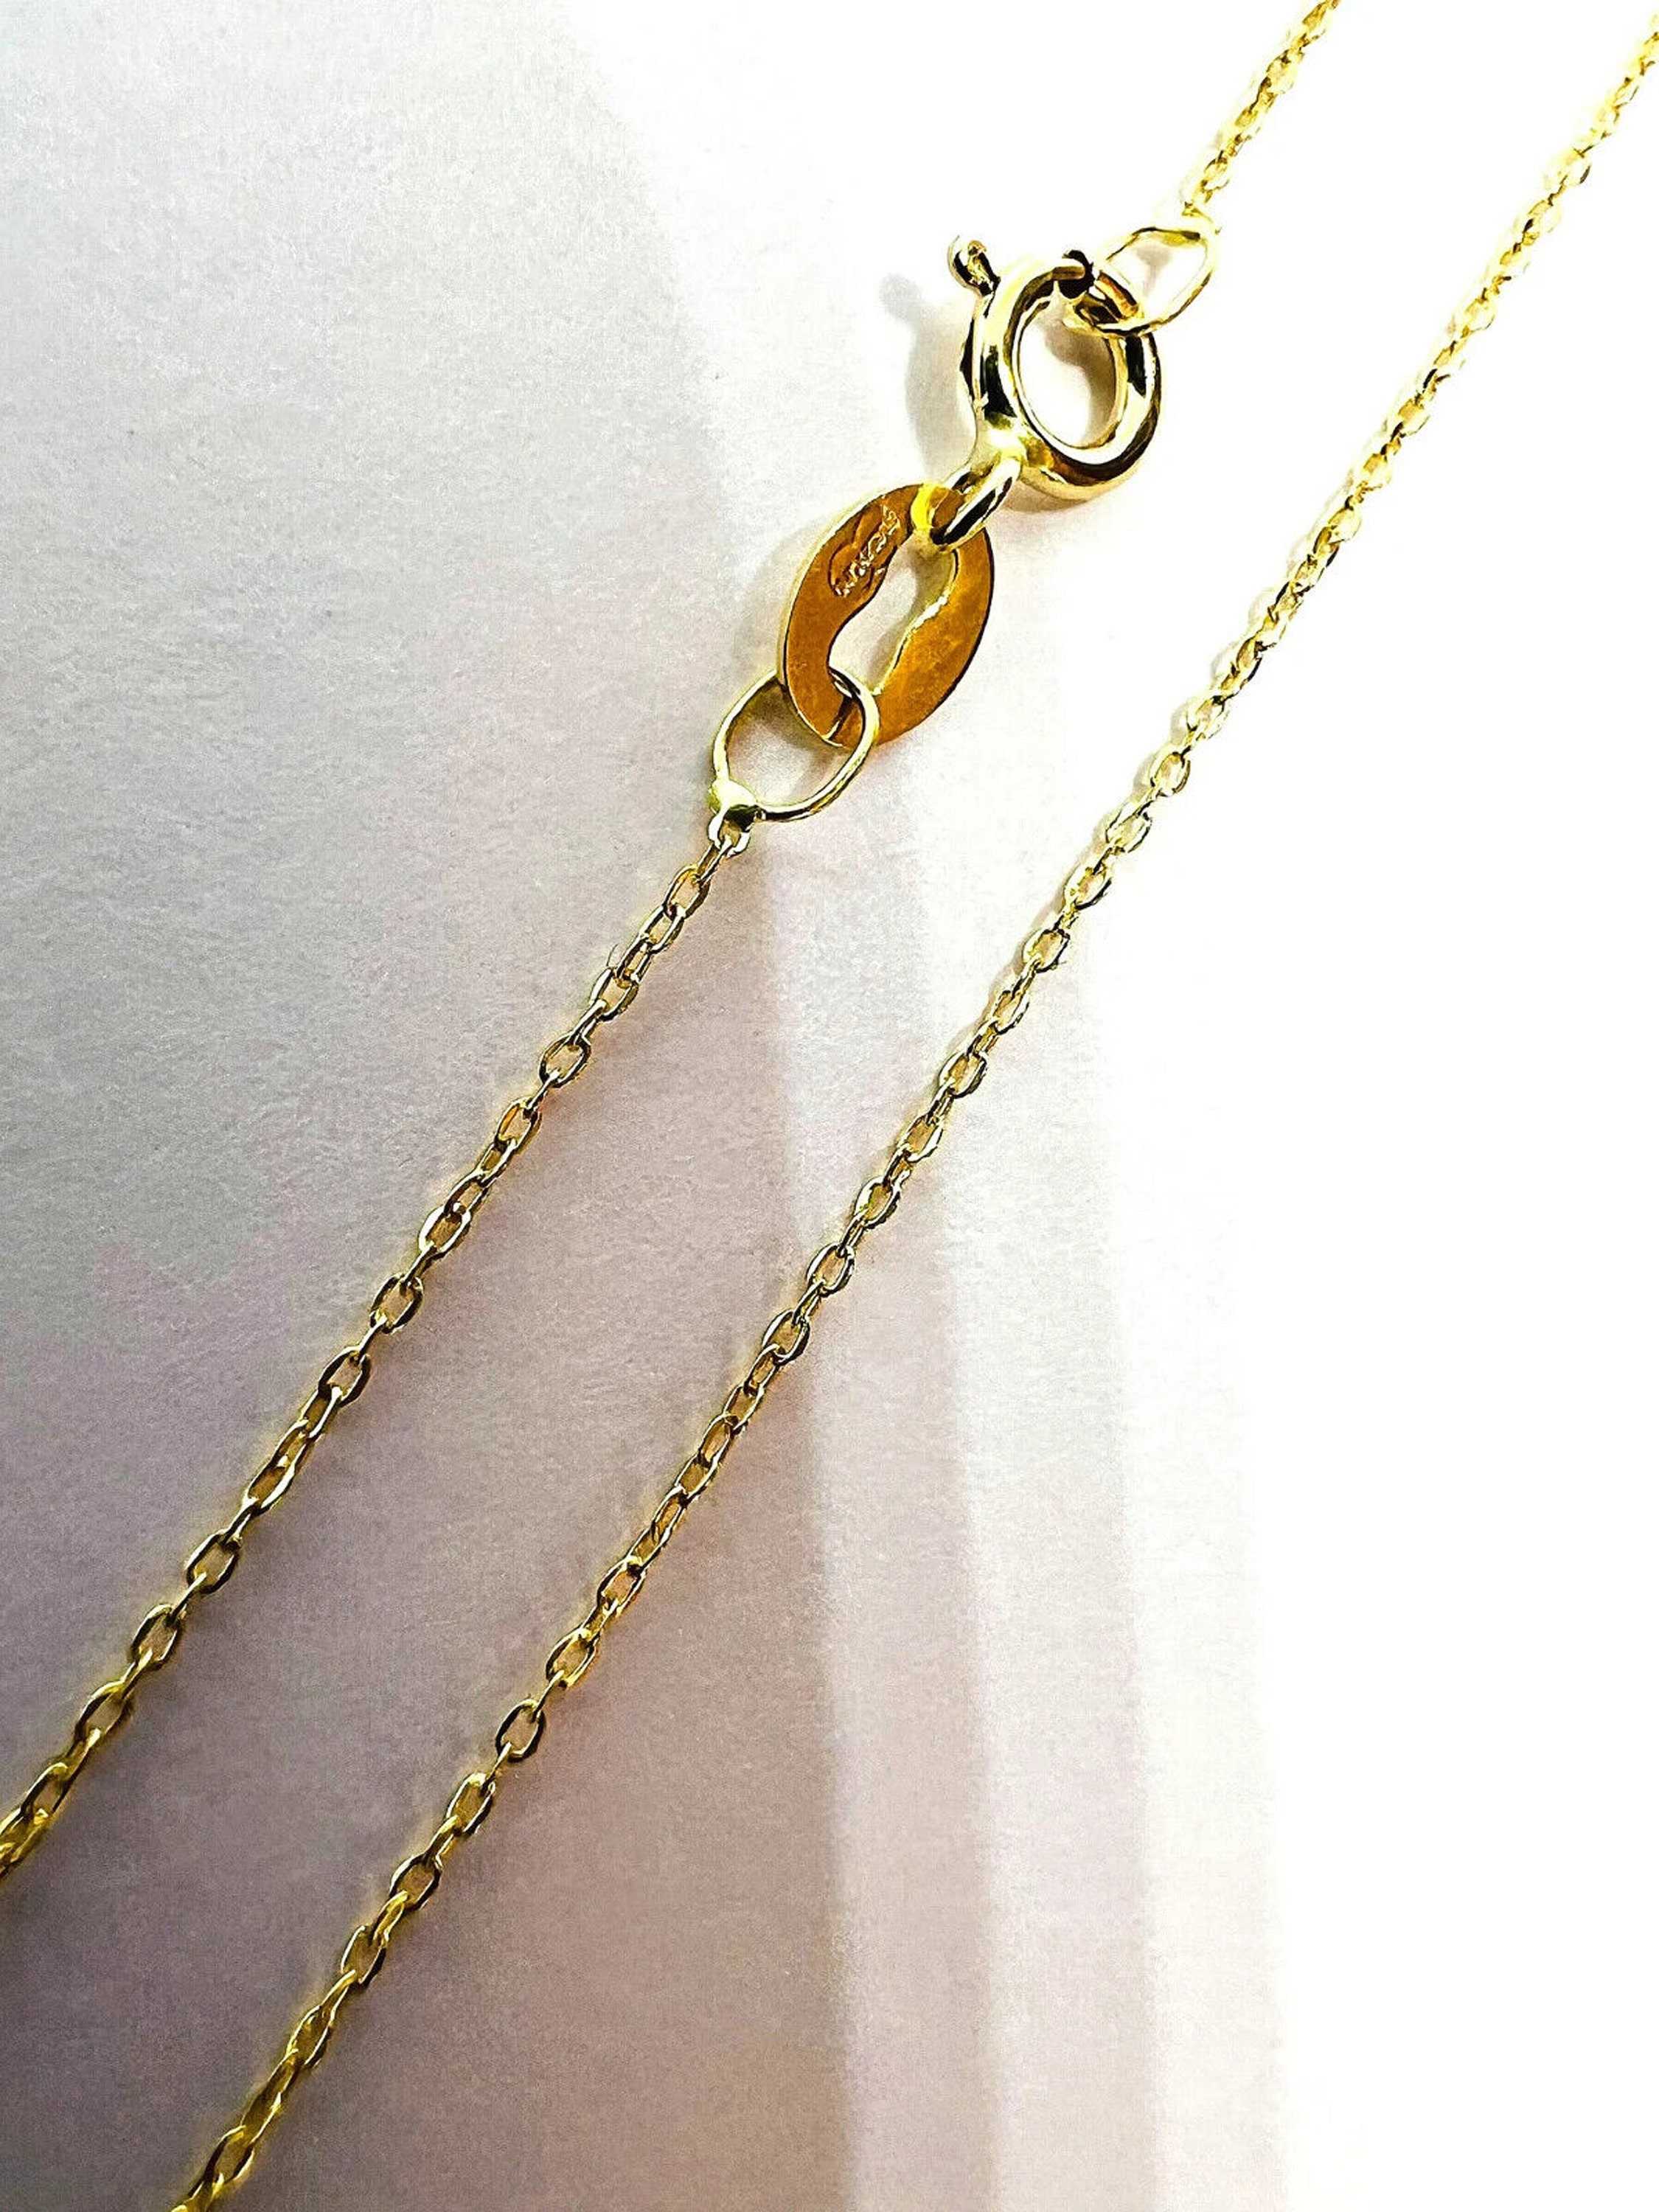 Gold Wheat Chain Necklace 17.7 Inch 1.2mm Thickness Delicate Gold Chain  Jewelry Making Ready to Wear Chain for Woman,wa-375 